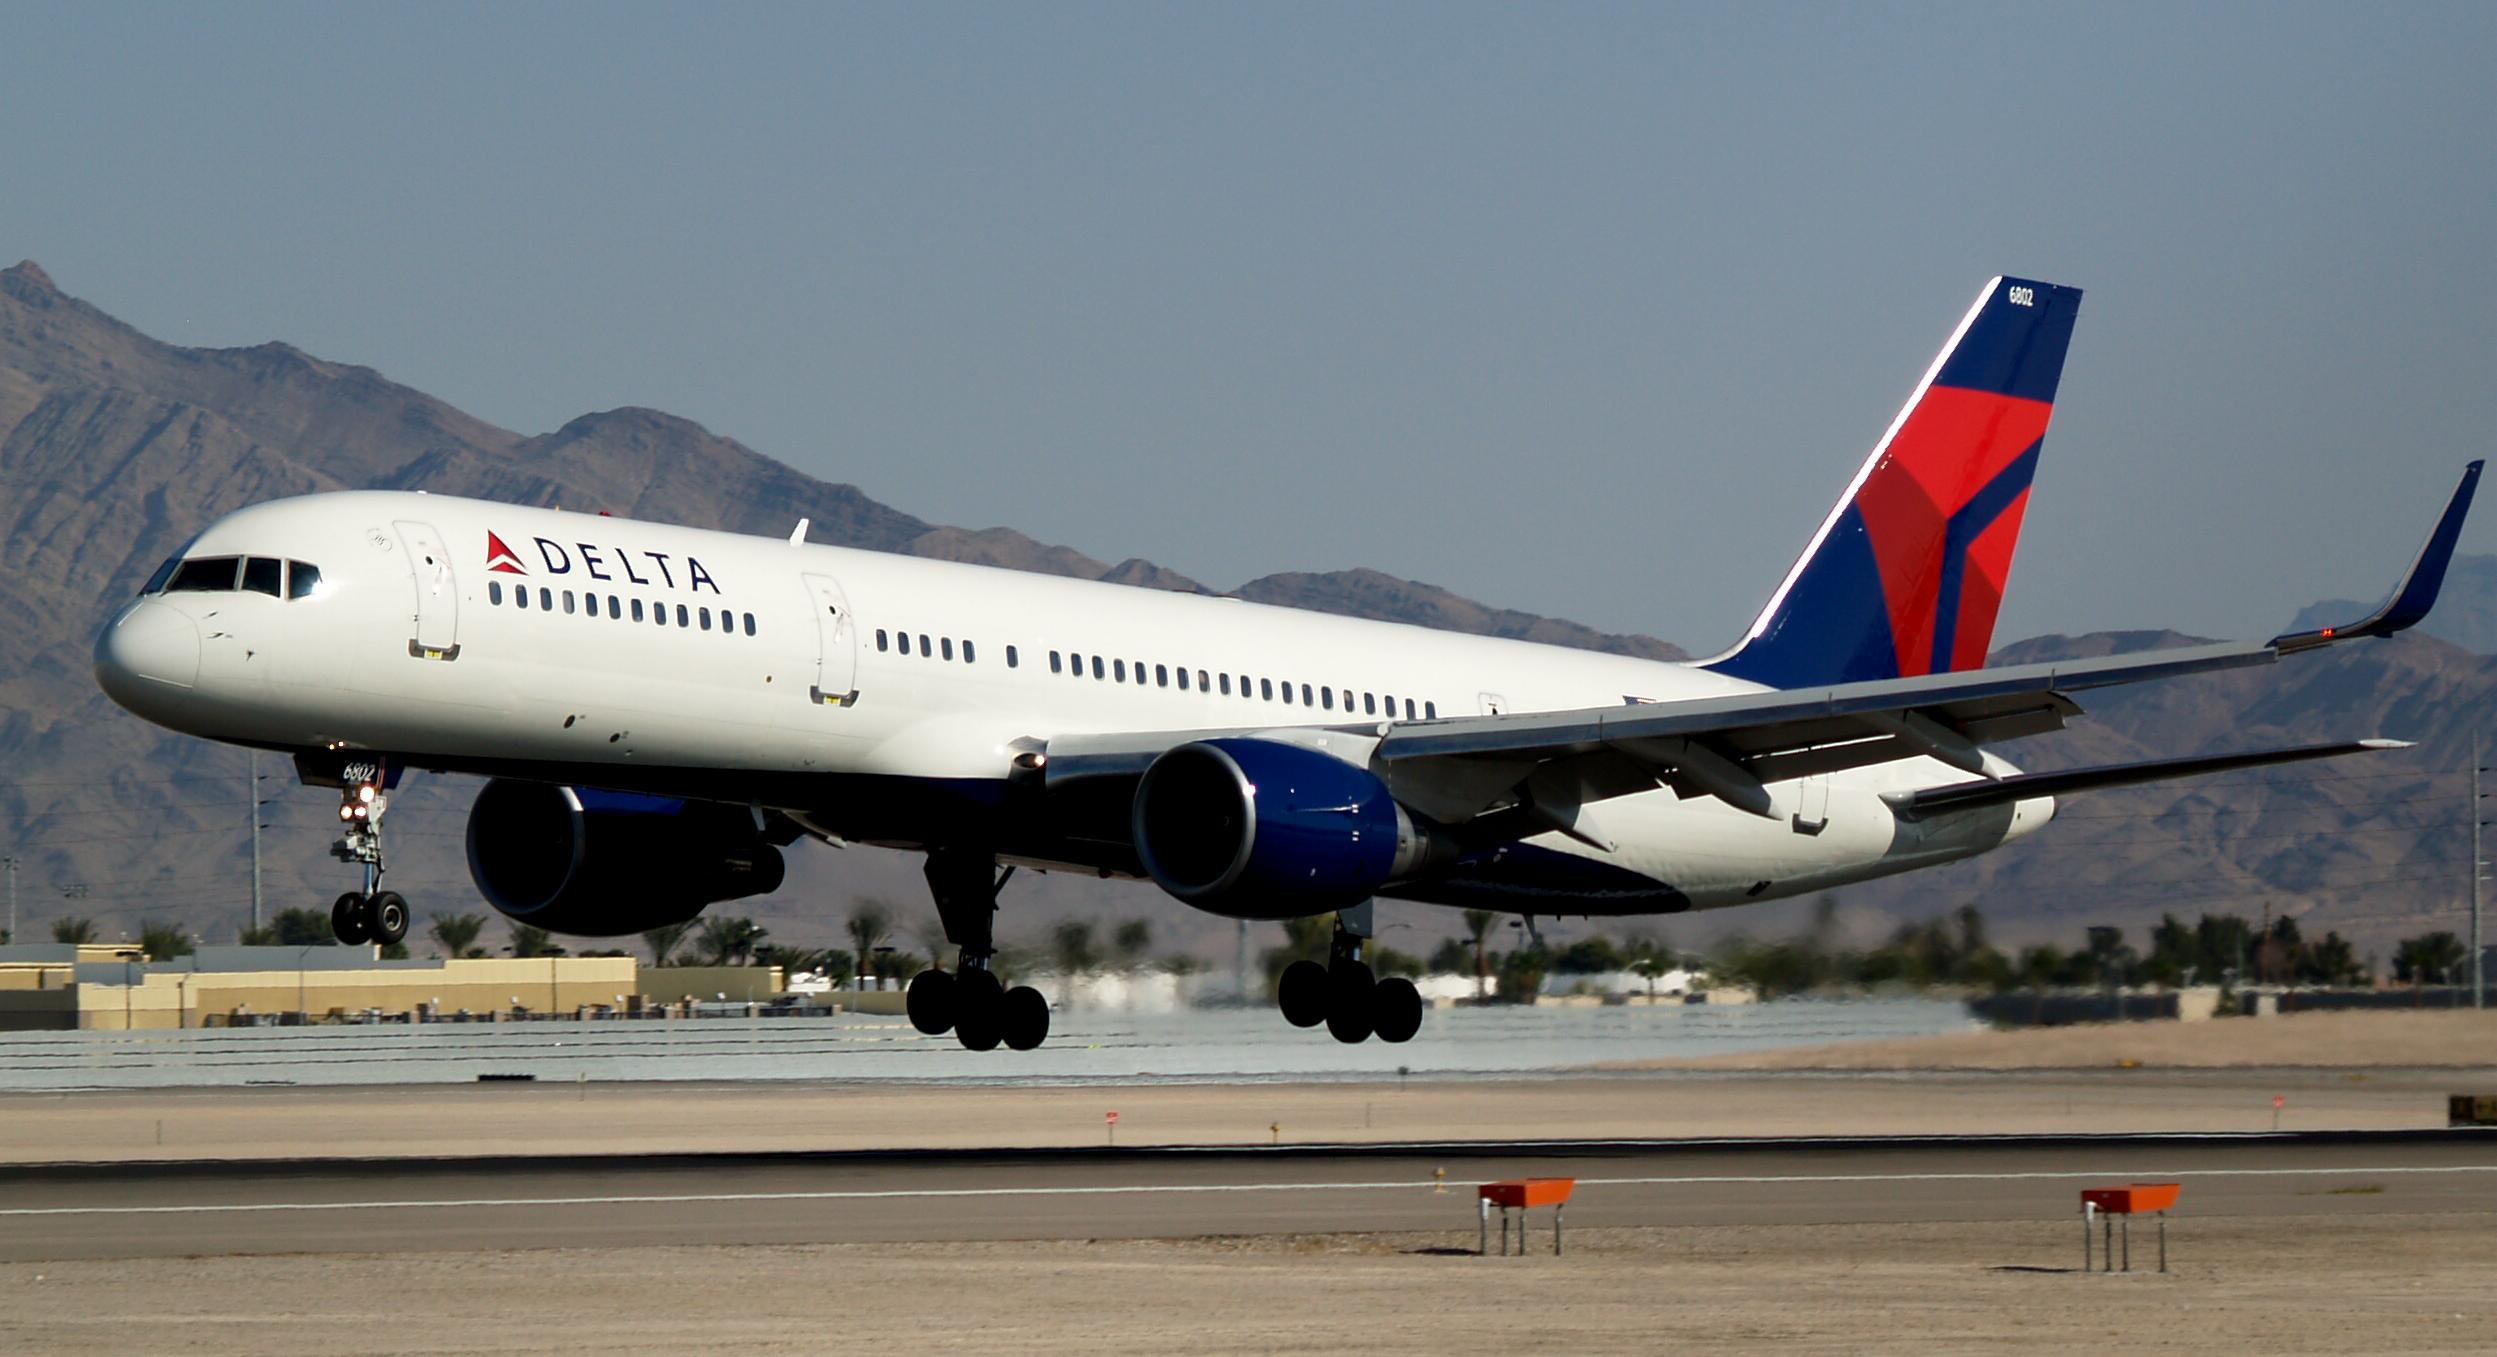 Earn up to 10,000 Delta Skymiles this fall per round trip